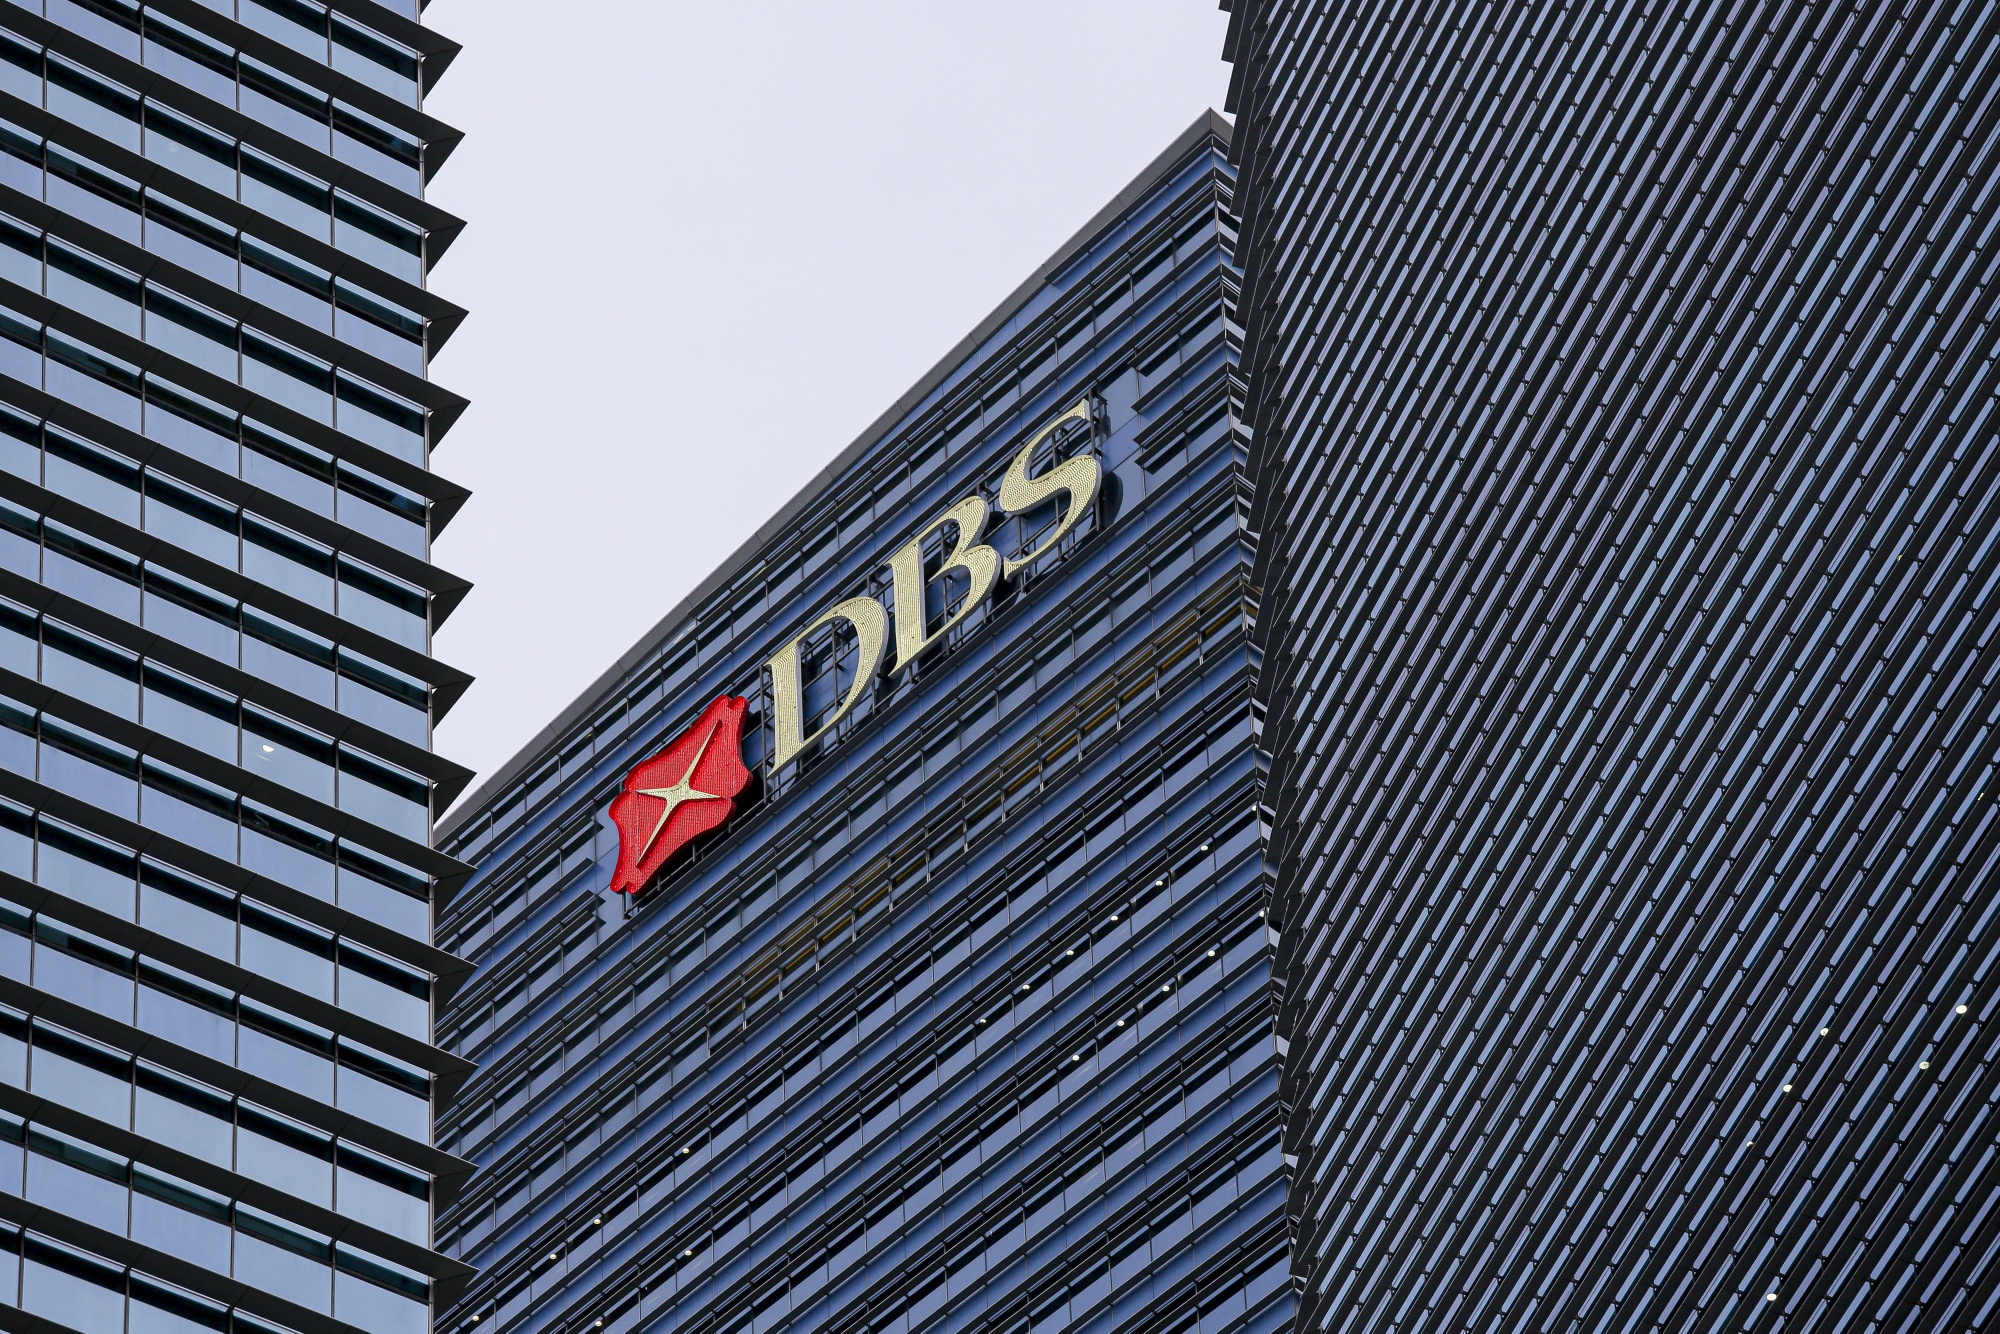 The DBS Group Holdings&nbsp;logo displayed atop Tower 3 of the Marina Bay Financial Centre in Singapore.